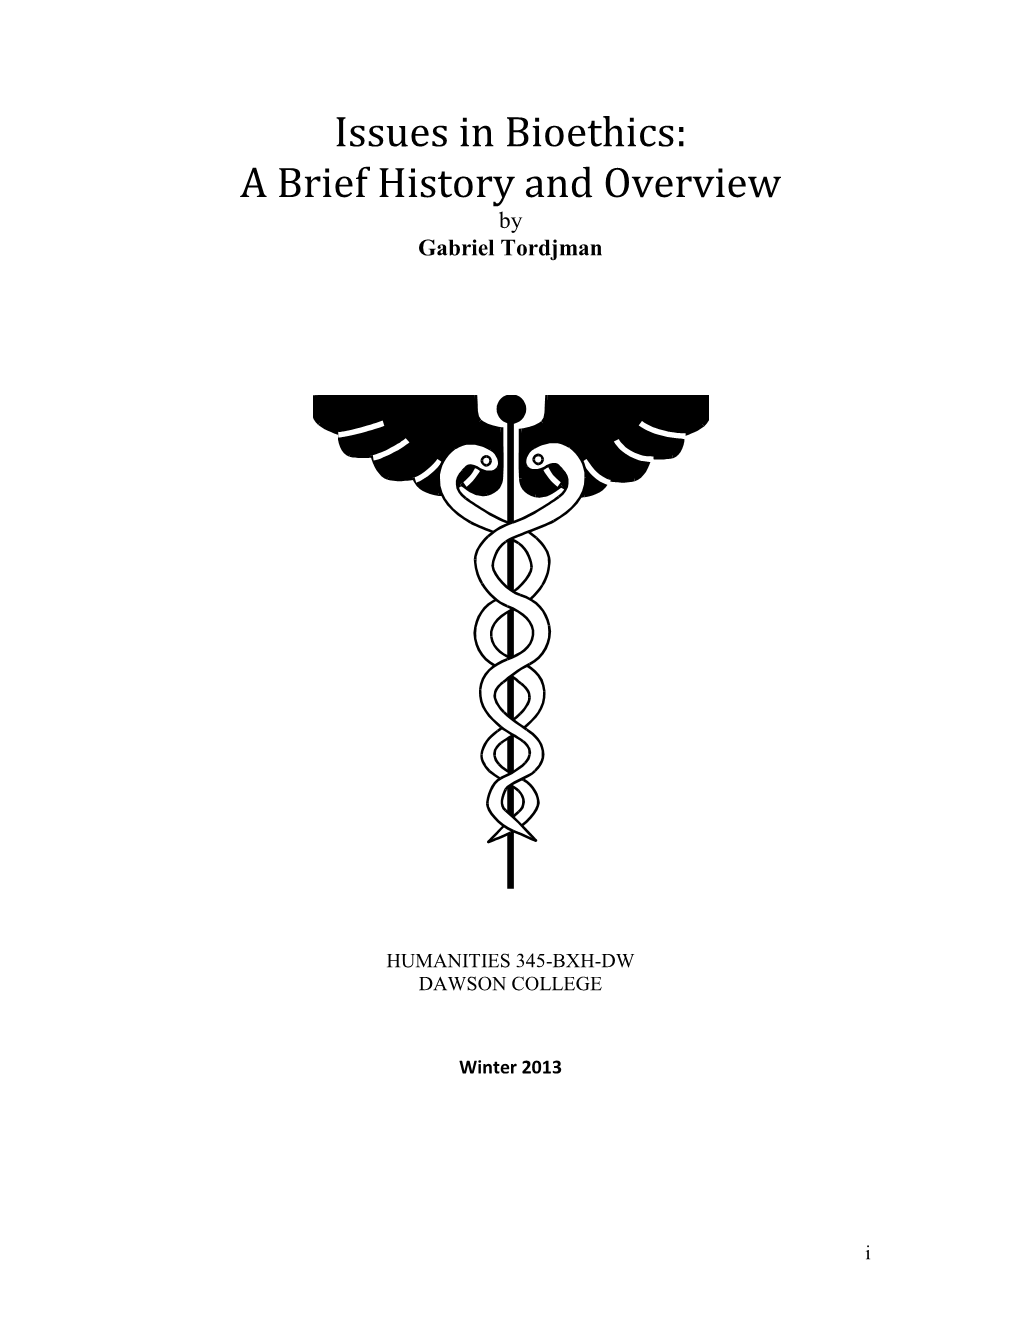 Issues in Bioethics: a Brief History and Overview by Gabriel Tordjman